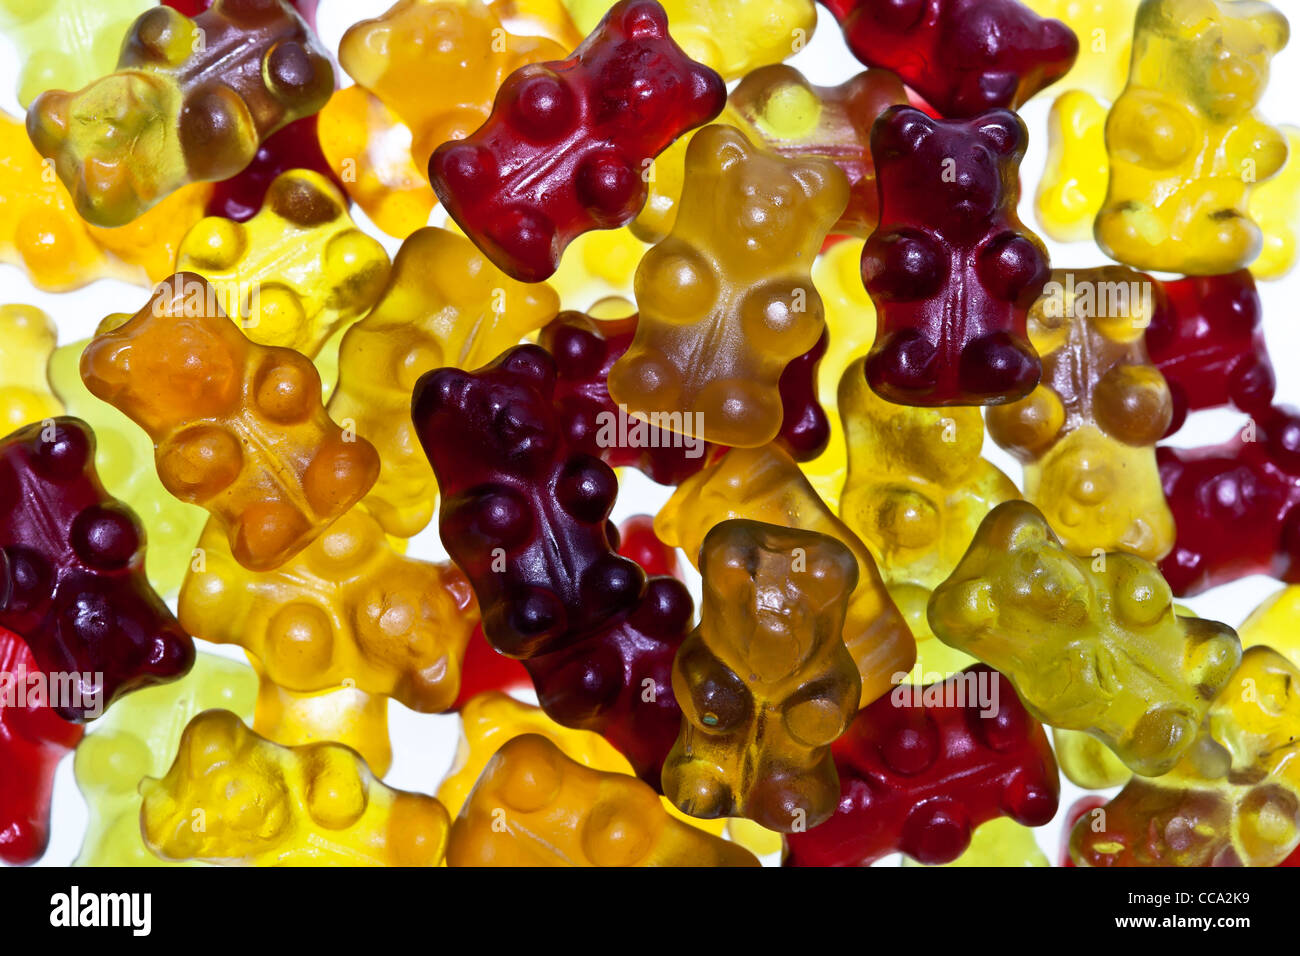 Organic gummi bears without gelatin, colored and flavored with fruit juice Stock Photo